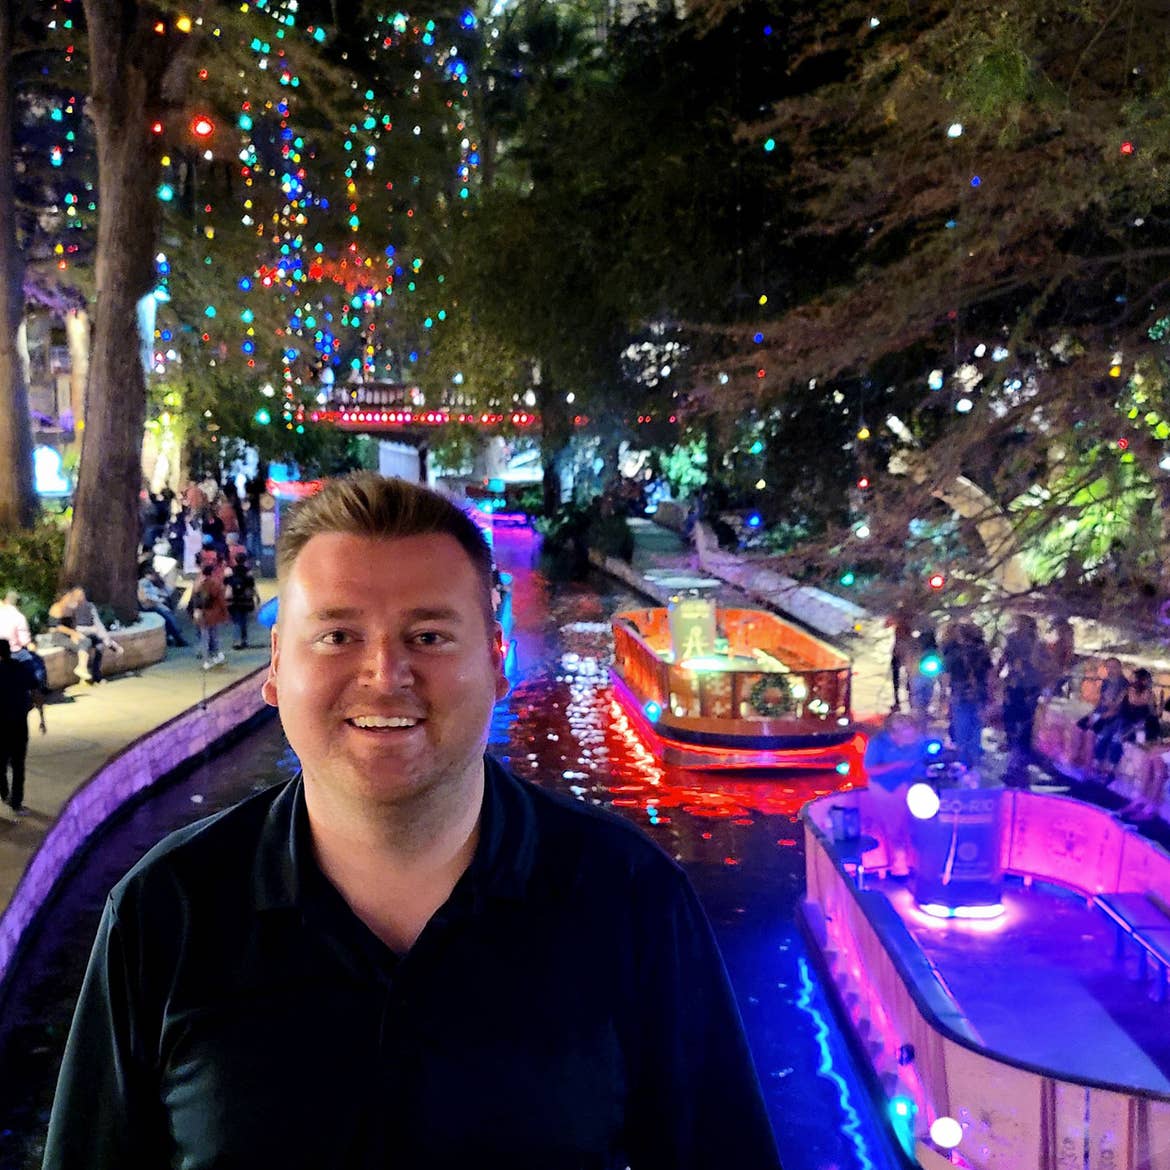 Author, Chris Harms, stands with in front of the San Antonio Riverwalk decorated for the holidays.